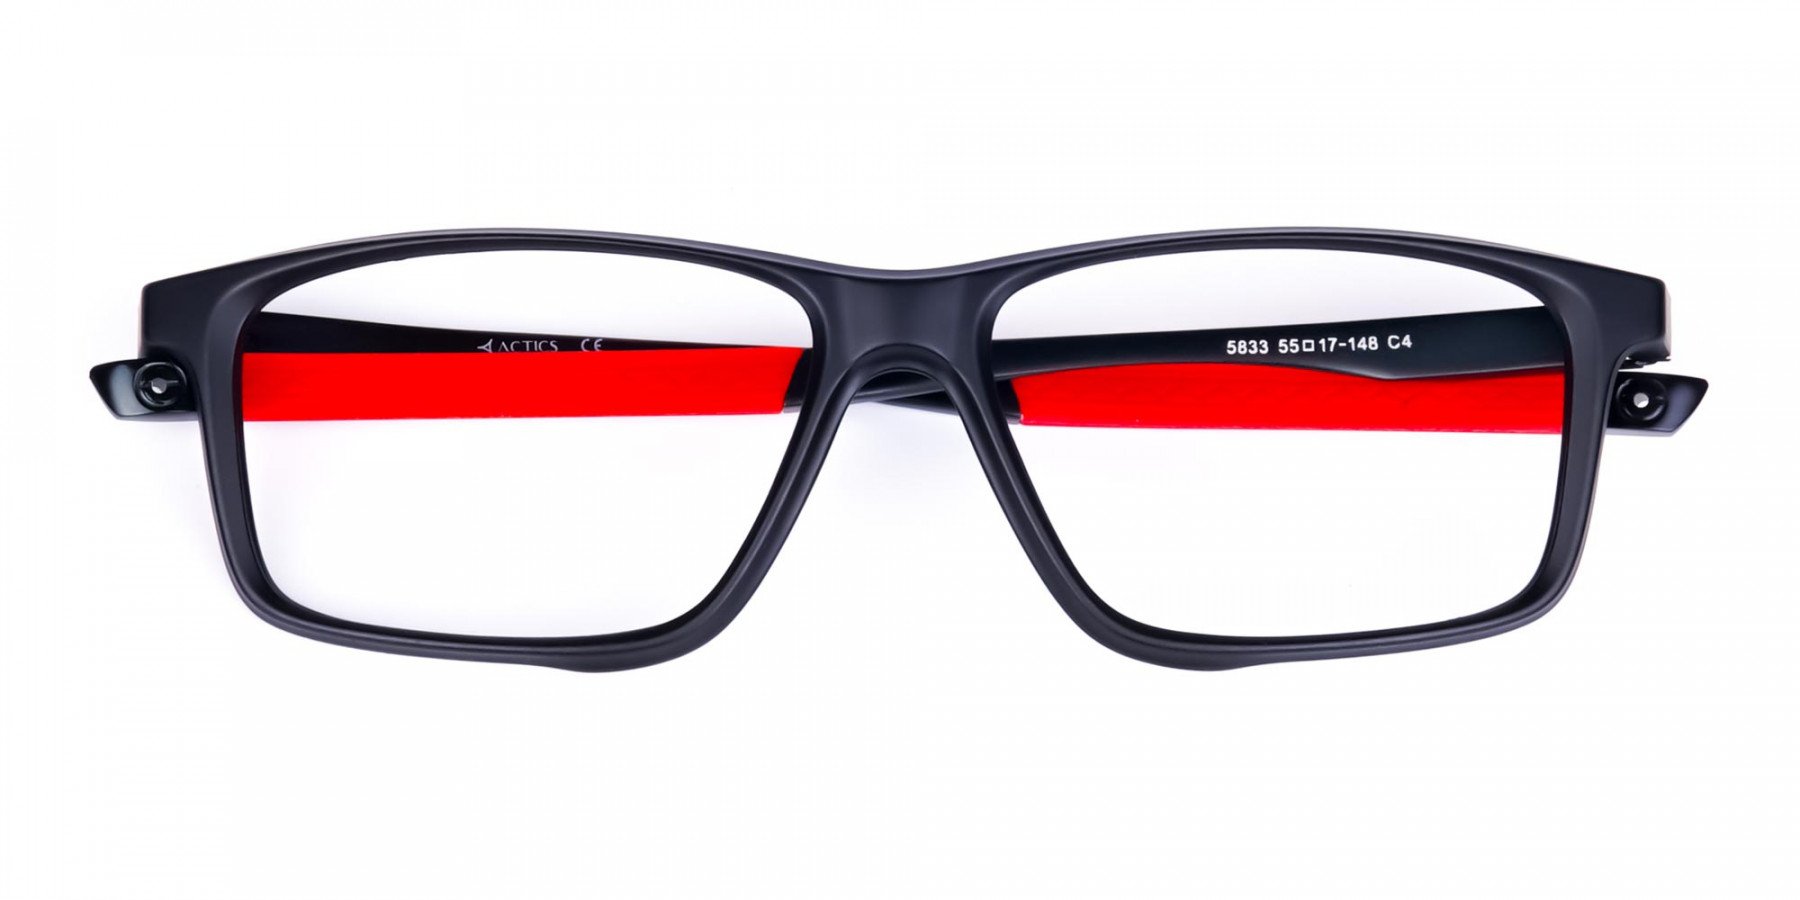 Black-and-Red-Sports-Glasses-in-Rectangle-Shape-1